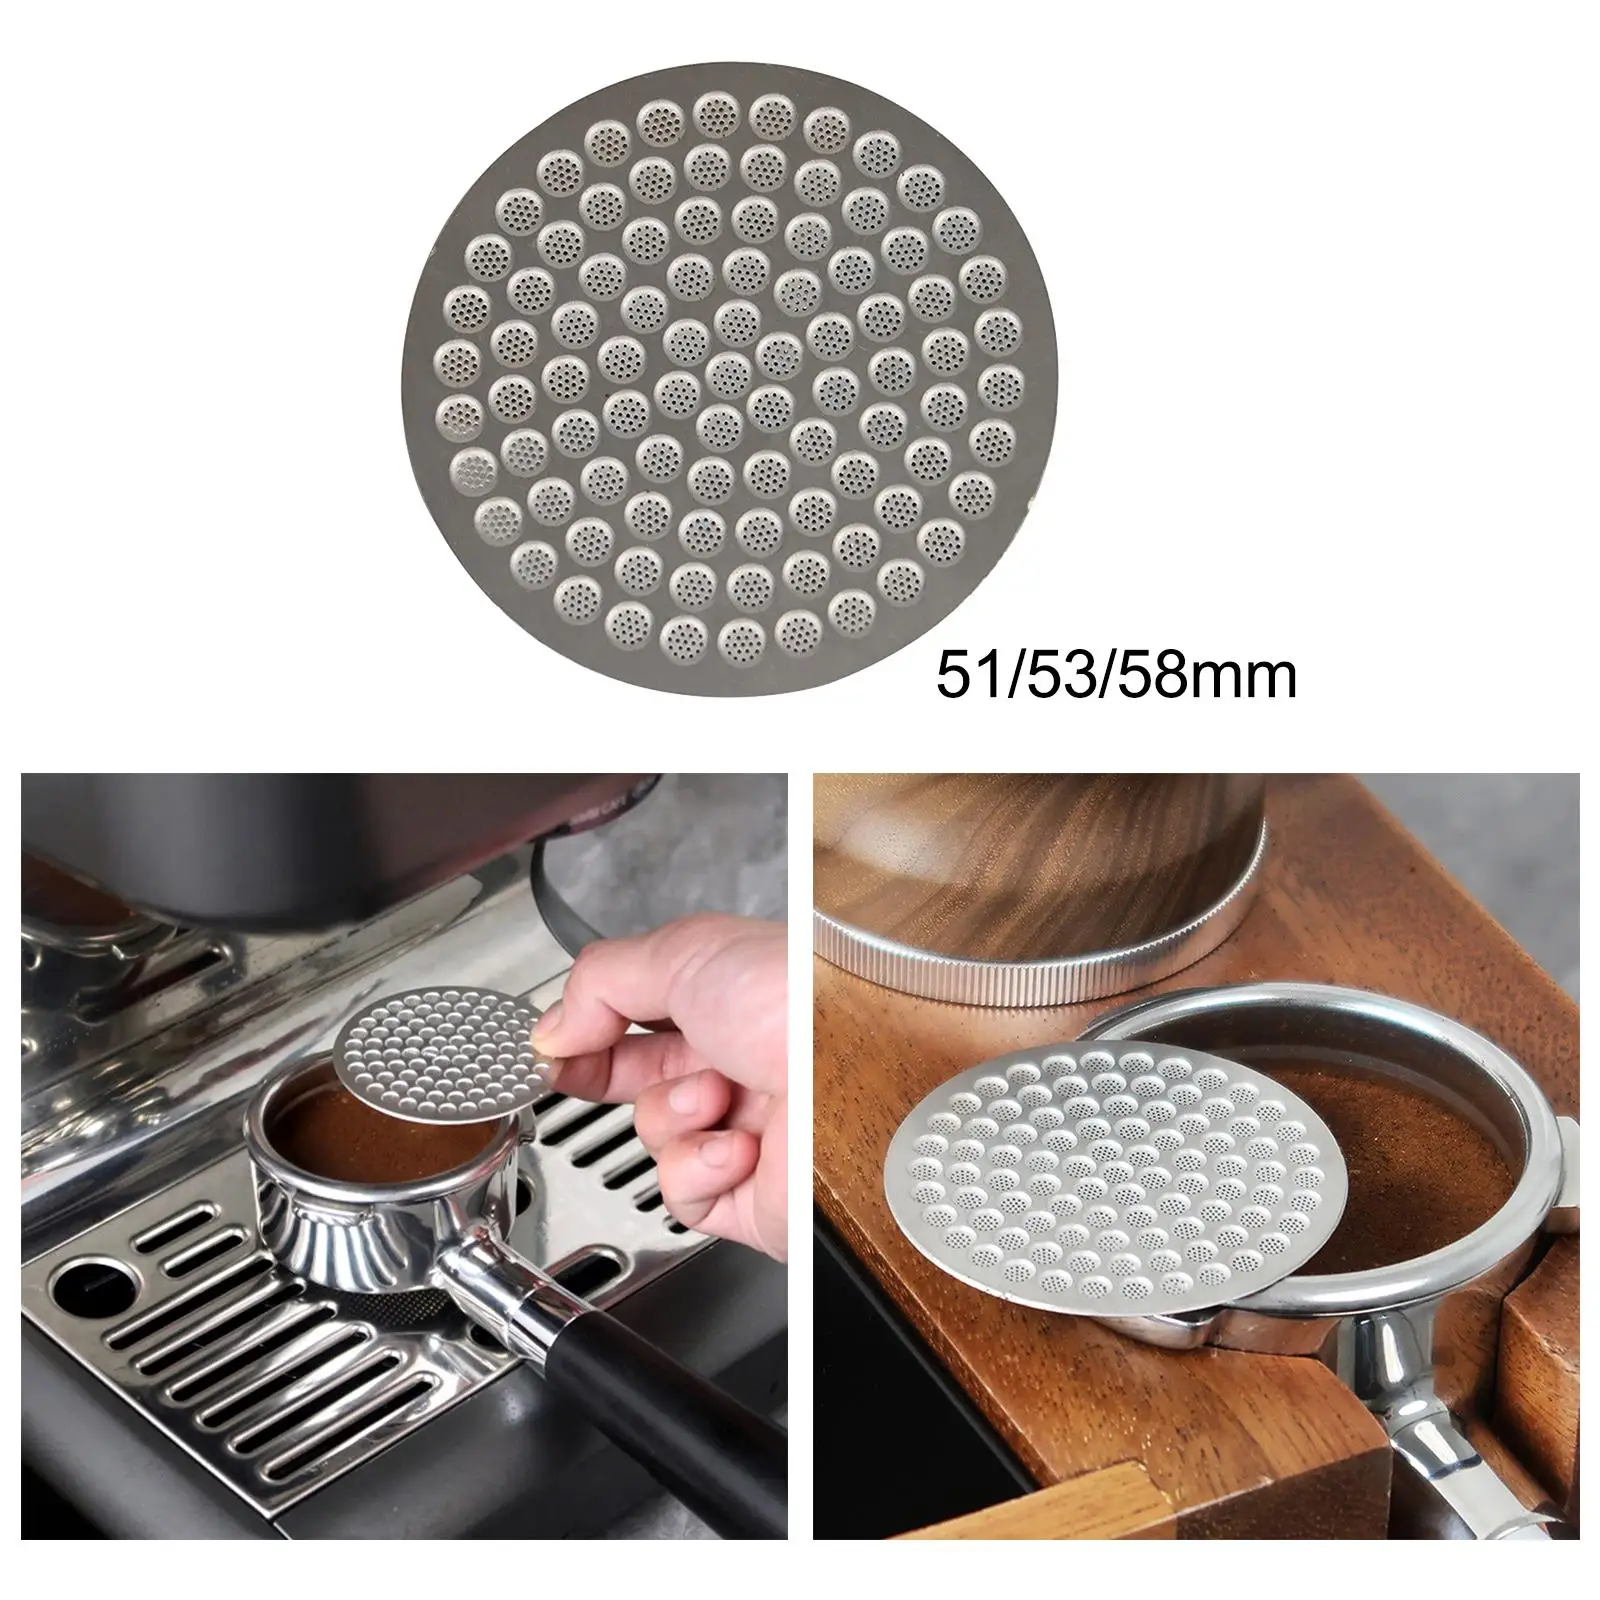 Stainless Steel Fine Coffee Filter Mesh Professional Barista Tool Metal Coffee Filter for Espresso Portafilter Filter Basket